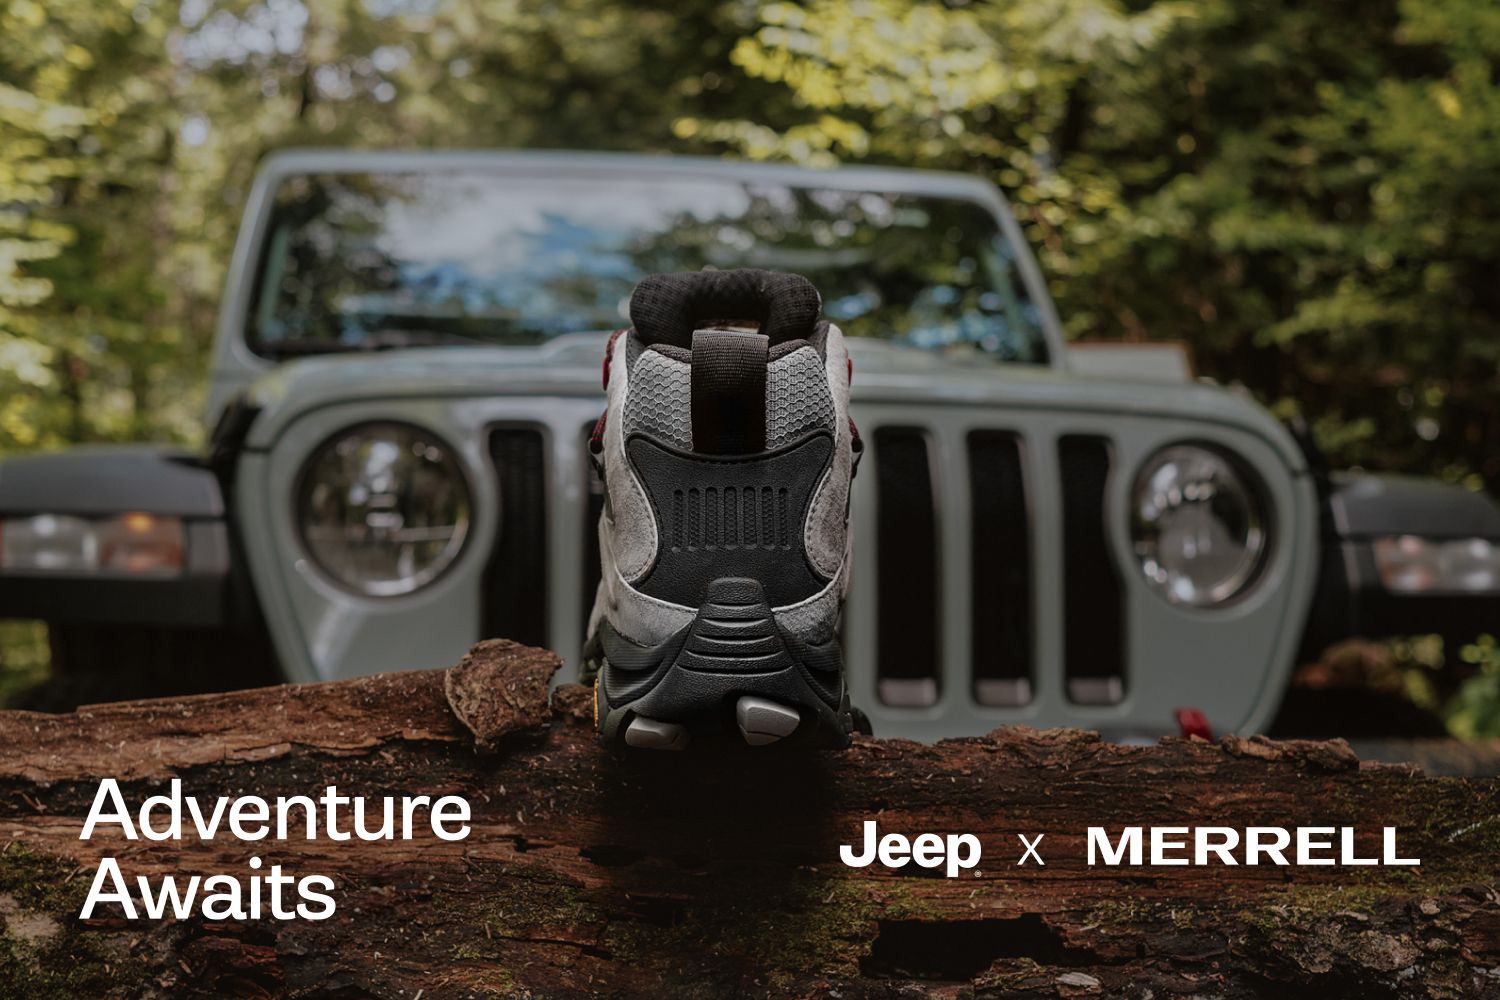 Close up shot of a Merrell shoe and a Jeep.